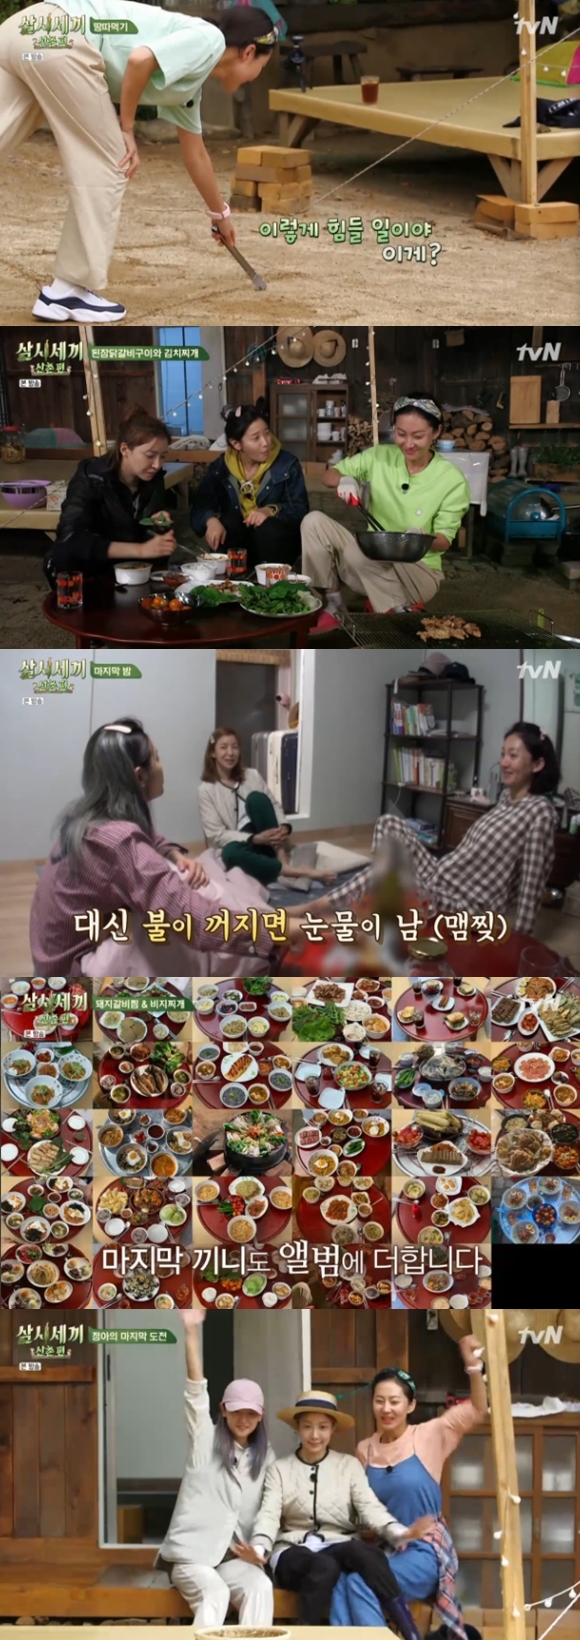 Actor Yum Jung-ah, Yoon Se-ah, and Park So-dam, who showed honey chemistry with other guests, ended their mountain village life.On TVN Three Meals a Day - Mountain Village, which was broadcast on the 18th, three family members were shown to meet the end of the Jeongseon Seki House in Gangwon Province.The three-kiss family, who returned to the three-kiss house after seeing the chapter with guest Park Seo-joon, started to eat ground to digest before preparing lunch.The bet was a lunch dishwasher. For the penalty, the four decided to play a personal game.Yum Jung-ah was anxious, saying, I am the last person in the individual game. But Yum Jung-ah did not give up until the end with a tong chance.Thanks to it, the last place in the dishwashing bet was back to Park So-dam.As time went by, the four decided to have a lunch menu with a simple menu.But like the big hands of this area, Yum Jung-ah, Yoon Se-ah and Park So-dam have begun to increase their work.Park Seo-joon told Park So-dam, I have to give my guest an egg fries, saying, I think I can eat it at a rest area on my way.The four of them had been hurriedly cooked, but their lunch was not completed until 5pm, and Park Seo-joon, who filled the ship, was ready to climb to Seoul.Yum Jung-ah greeted Park Seo-joon, who was about to leave the three-piece house, saying, I will keep jumping rope.Park So-dam said, I feel like sending a army. He walked Park Seo-joon to the car with Yum Jung-ah and Yoon Se-ah.The three people, who had been taking a break after Park Seo-joon left, opened the Salt Grill Grill as the evening approached.The last dinner menu at the Sekisui House was Miso chicken ribs grilled and miso stew.Yum Jung-ah, who was called to beans for the bjiji stew tomorrow morning while preparing dinner, said, Is it called too much? He tilted his head and told the production team, Do not eat tomorrow morning.Park So-dam, who tasted kimchi stew once, admired it, saying, You have to eat rice.Yum Jung-ah, who tasted the chicken ribs in front of the grill, said, We have to solve the waist.Yum Jung-ah, like the master of the mountain village, hand-baked chicken ribs to the crew who harassed him with rope skipping throughout the morning.On the last night in the mountain village, the three men lay on the electric sign and recalled their mountain life.He started with I am not afraid of cooking now and said, I come here and laugh a lot.While the emotional story continued, Park So-dam laughed, saying, Now, even if you fire, you do not tears. If you turn off instead, you will tears.The three of them had always opened their last morning with fresh bean coffee, especially the espresso ice that Park So-dam had frozen in advance.The three men filled their energy with a cubratte, which is not often seen in the mountain villages, and set out to prepare for breakfast, with the last meal of the three families being steamed pork ribs and bizi stew.The three of them were not embarrassed by many menus, as they were four times in the mountain village.Yum Jung-ah has also started a full-scale cooking by simulating images like a main chef.And Park So-dam has left a picture of the mountain villages table as he has always done.Na Young-Seok PD made a fascinating proposal to the three people who started the rear-end after the last meal in the mountain village.Yum Jung-ah said that if Yum Jung-ah succeeds in jumping rope, he will replace the last dishwasher. Yum Jung-ah said, If you do not do it, you should do the dishes.And as if to look at it, he made 25 jump ropes at a time, surprising the crowd. Yum Jung-ah, who was surprised by the unexpected success, was thrilled that he was boxing like this.While I PD sat on the tap and did the last dishwashing, the three people piled up memories by taking pictures in the background of the three House.On the other hand, the three families who met with the production team at Seoul after the mountain village were impressed by the album gift prepared by the production team.After that, the crews handed out the cabbage planted in the field by three people in the mountain village, saying, The real gift is this.Yum Jung-ah, Yoon Se-ah and Park So-dam looked both inspiring and unimpressed.And on the day of the ceremony, Onara, which appeared as the second guest of Three Meals a Day - Mountain Village, was welcomed by the three families.Three Meals a Day - Mountain Village, which presented healing to viewers every Friday night, will end, and next Friday at 9:10 pm on tvN, Shin Seo-yugi 7 - Homecoming will be broadcast.Photo: TVN Three Meals a Day - Mountain Village broadcast screen capture